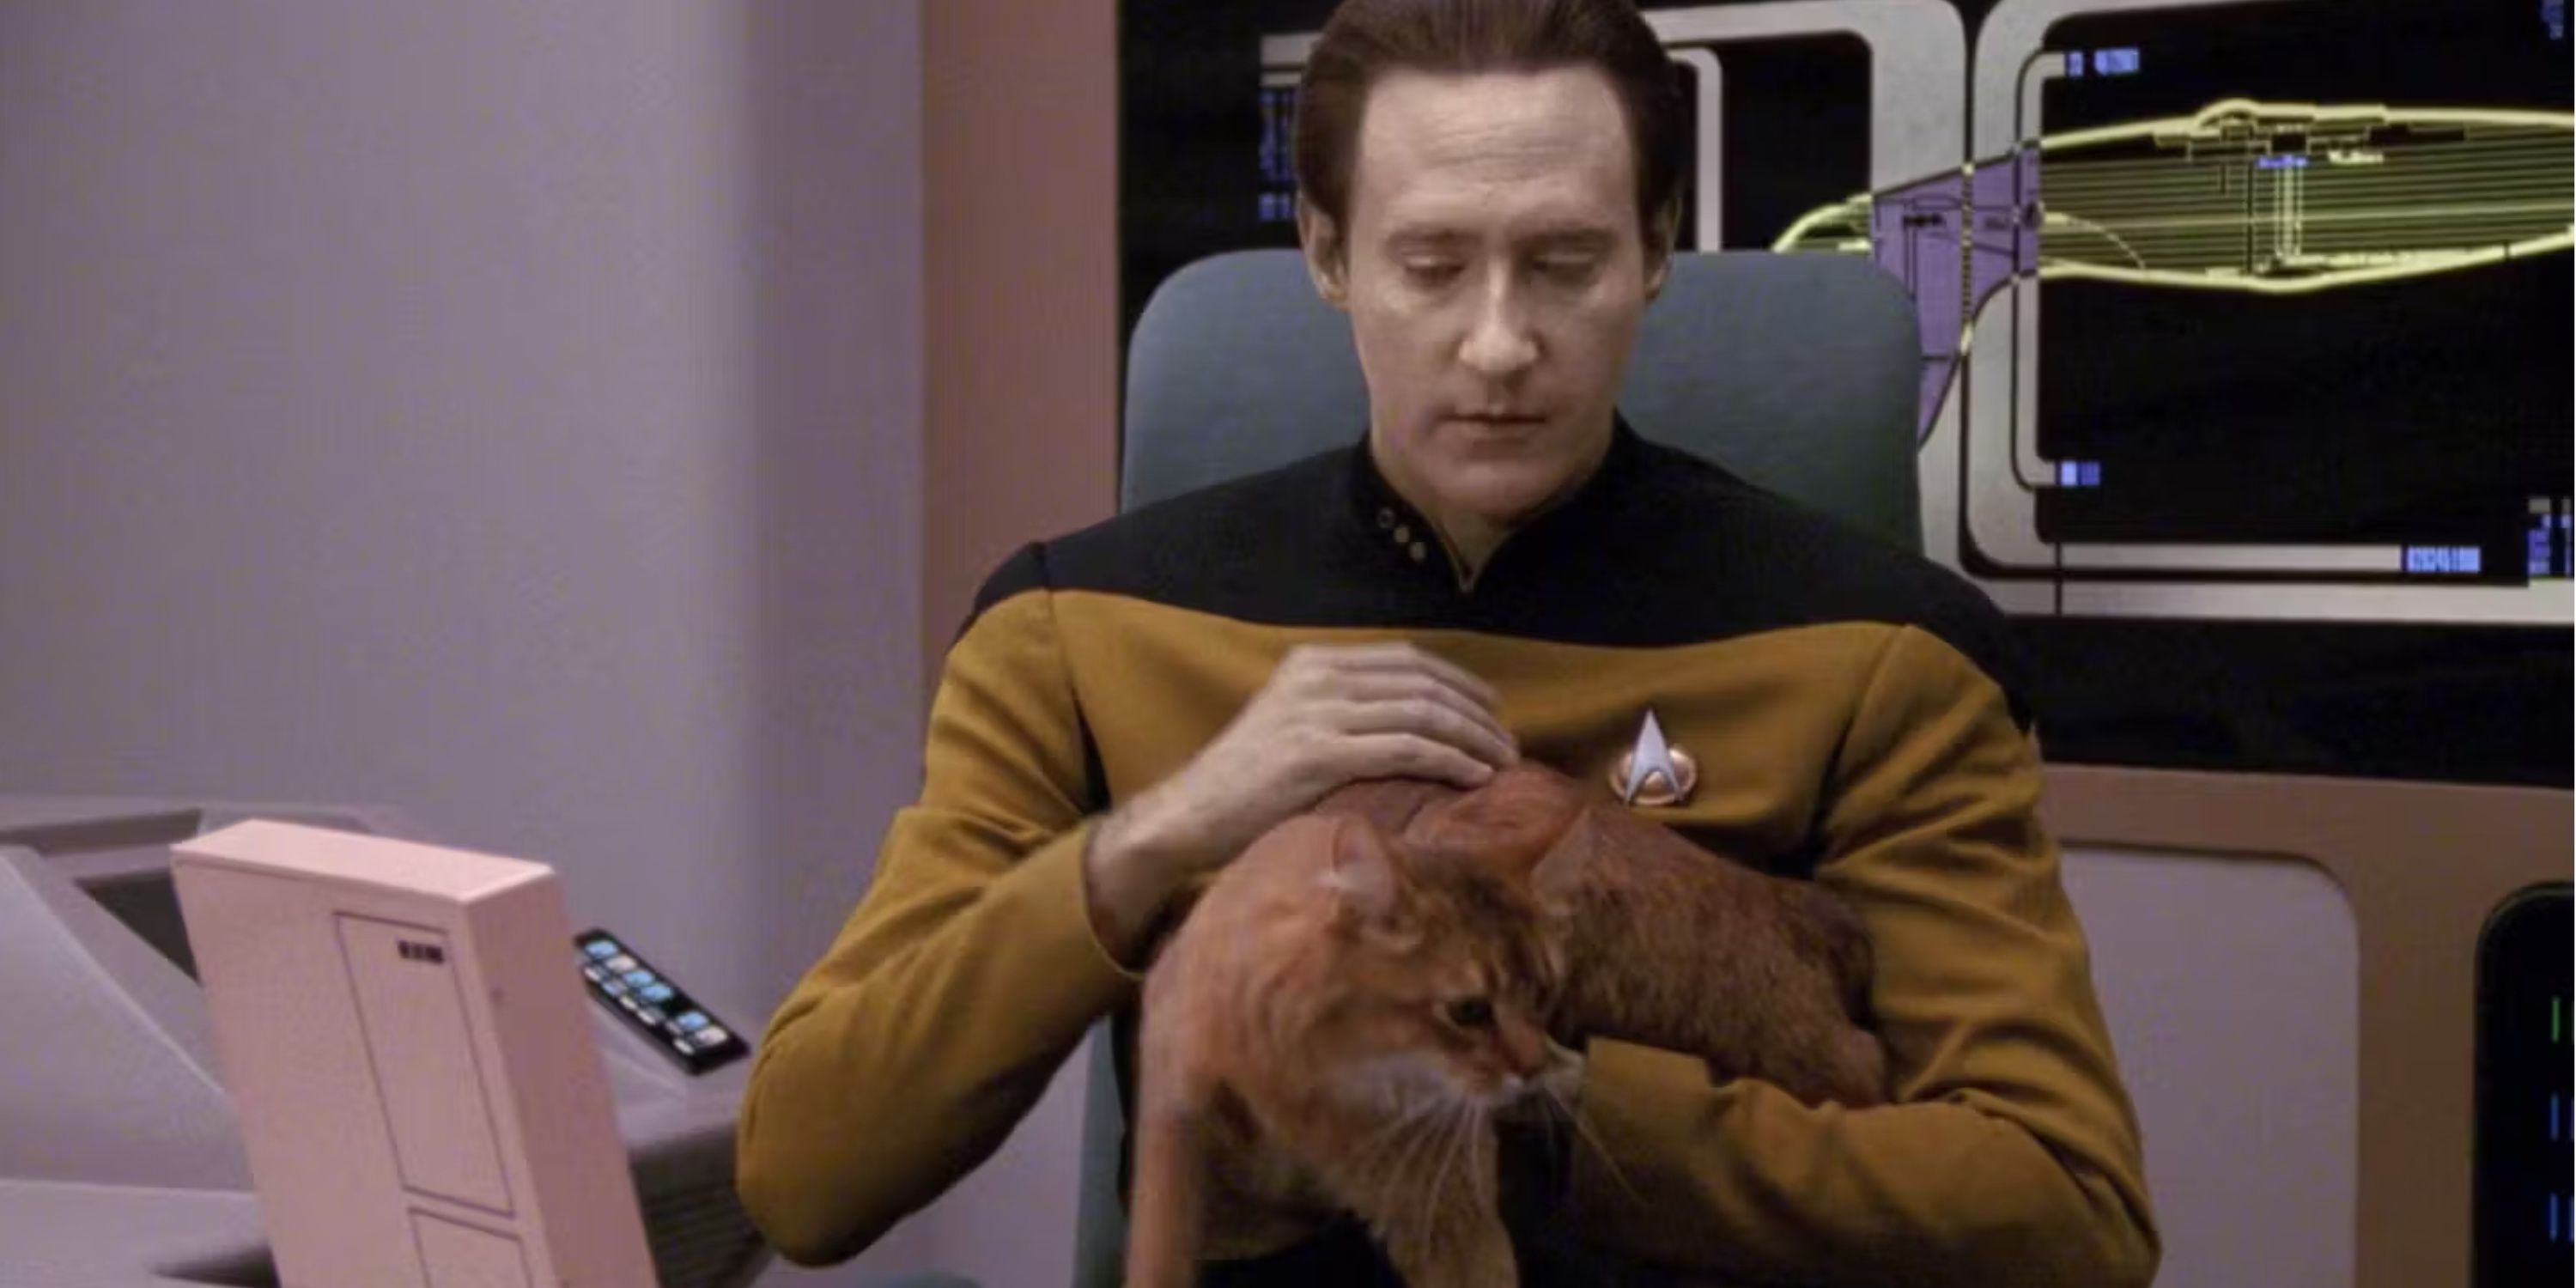 data and his cat spot